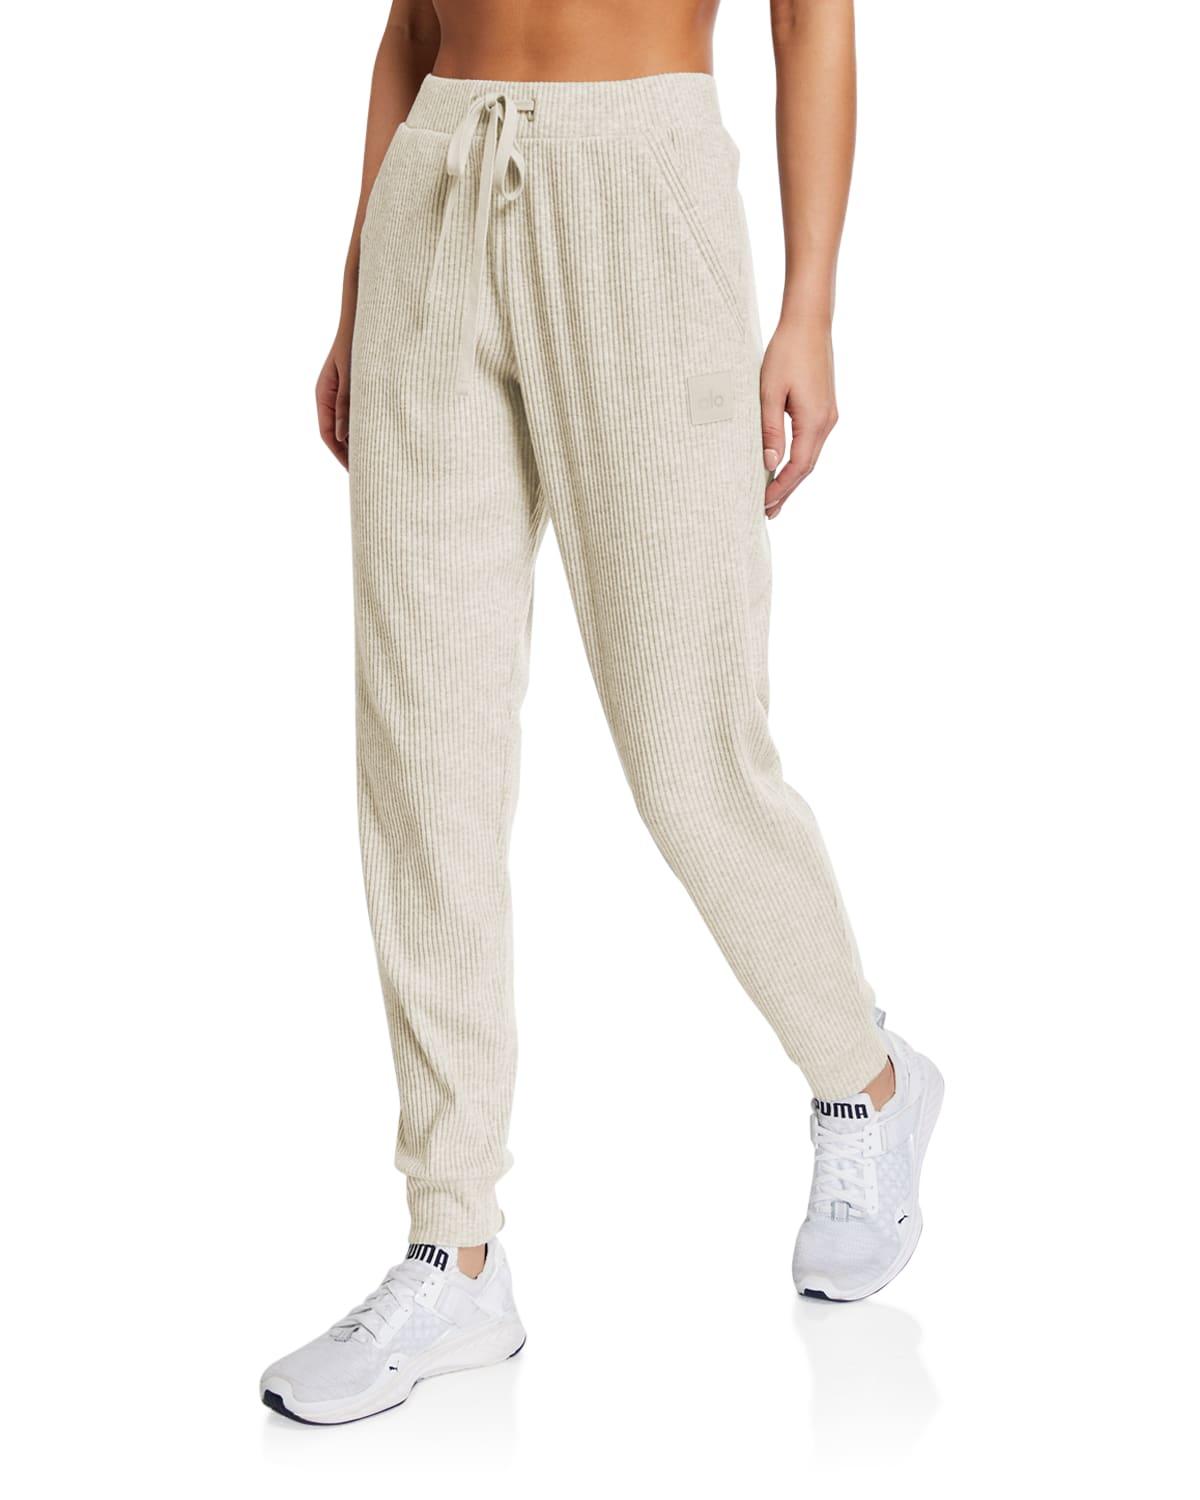 Alo Yoga Muse Sweatpants in Natural